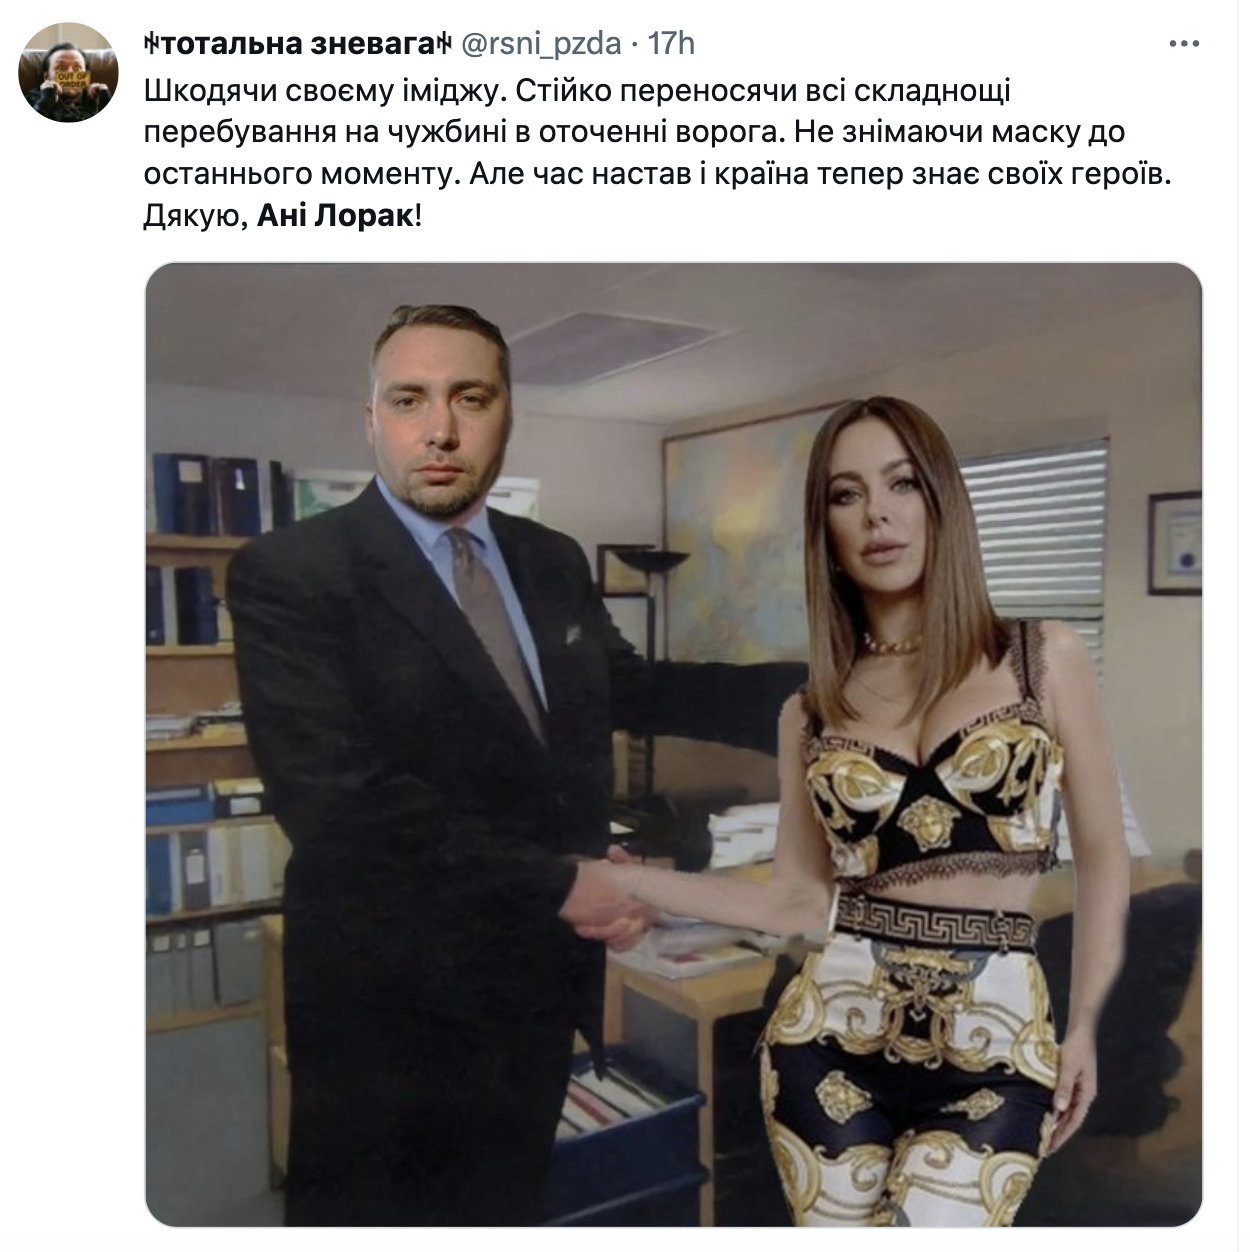 Lorak donates to the AFU, Lebigovich goes to the presidency, and over Kiev - UFO: news-memes that marked the year 2023